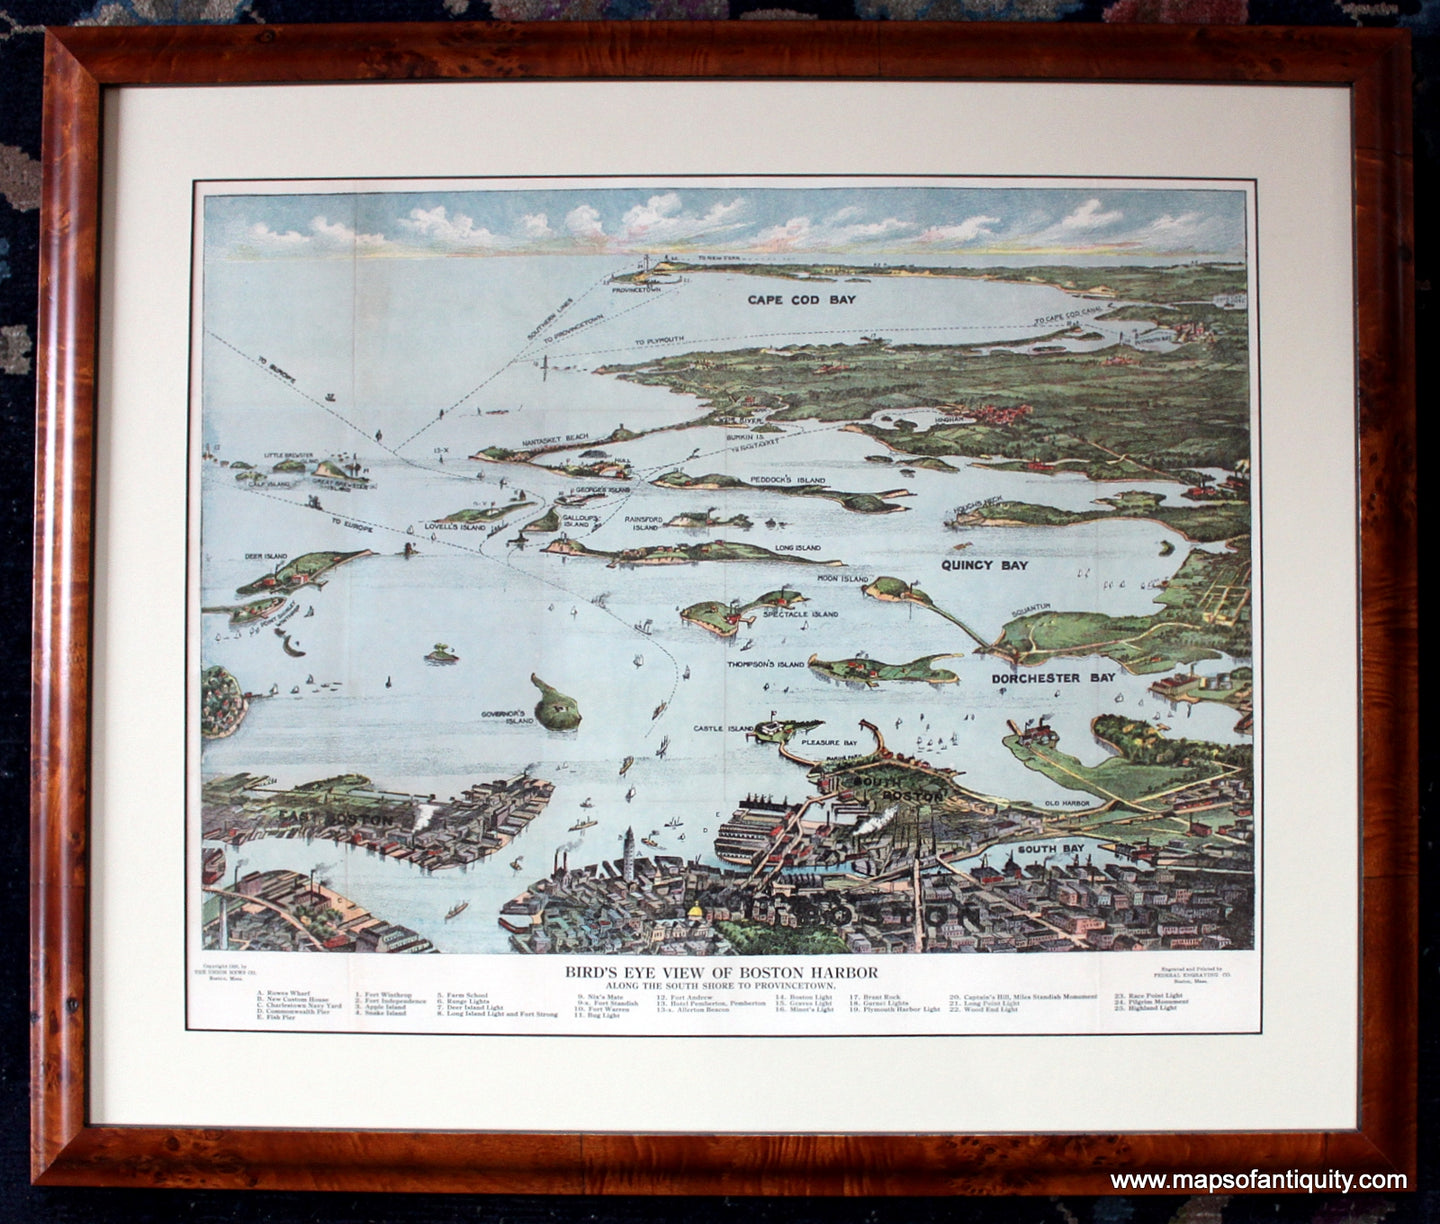 Framed-Reproduction-Bird's-Eye-View-of-Boston-Harbor---Reproduction-Holiday-Gift-Reproductions-Reproduction-Federal-Engraving-Co.-Maps-Of-Antiquity